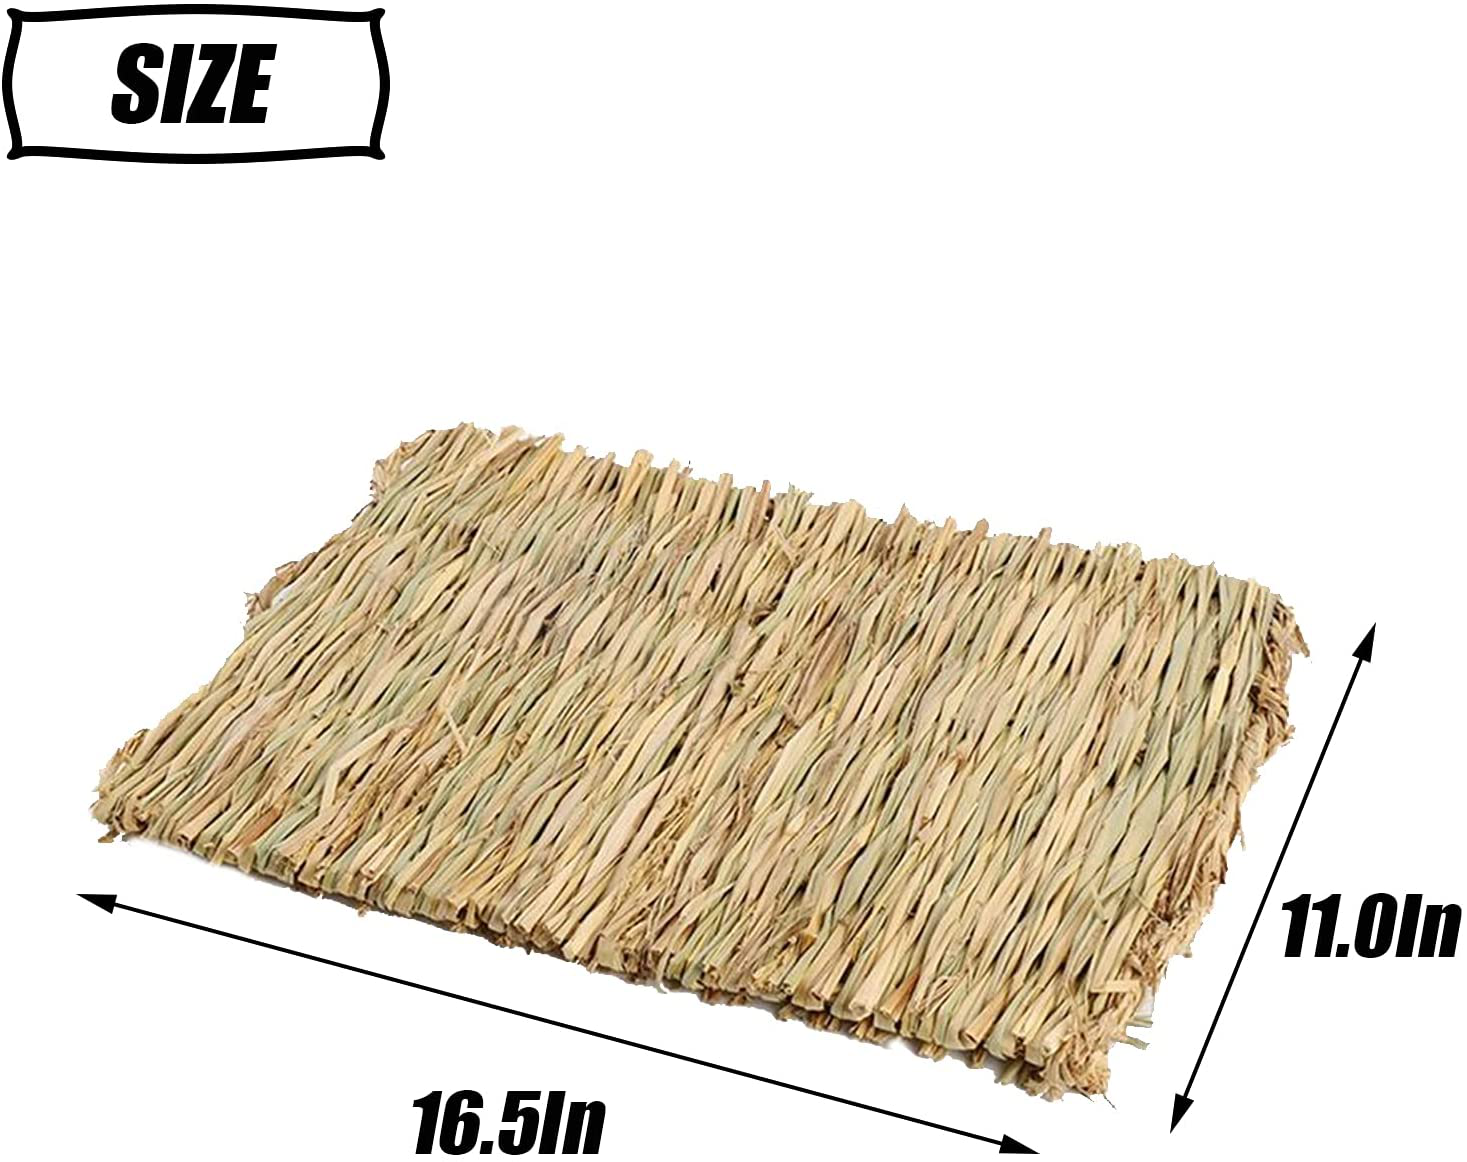 Tfwadmx Rabbit Grass Mat,16.5''X11'' Large Small Animal Natural Woven Straw Bed Hay Sleeping Nest Cage Chew Play Toy for Chinchilla Guinea Pig Ferret Bunny Hamster Rat-